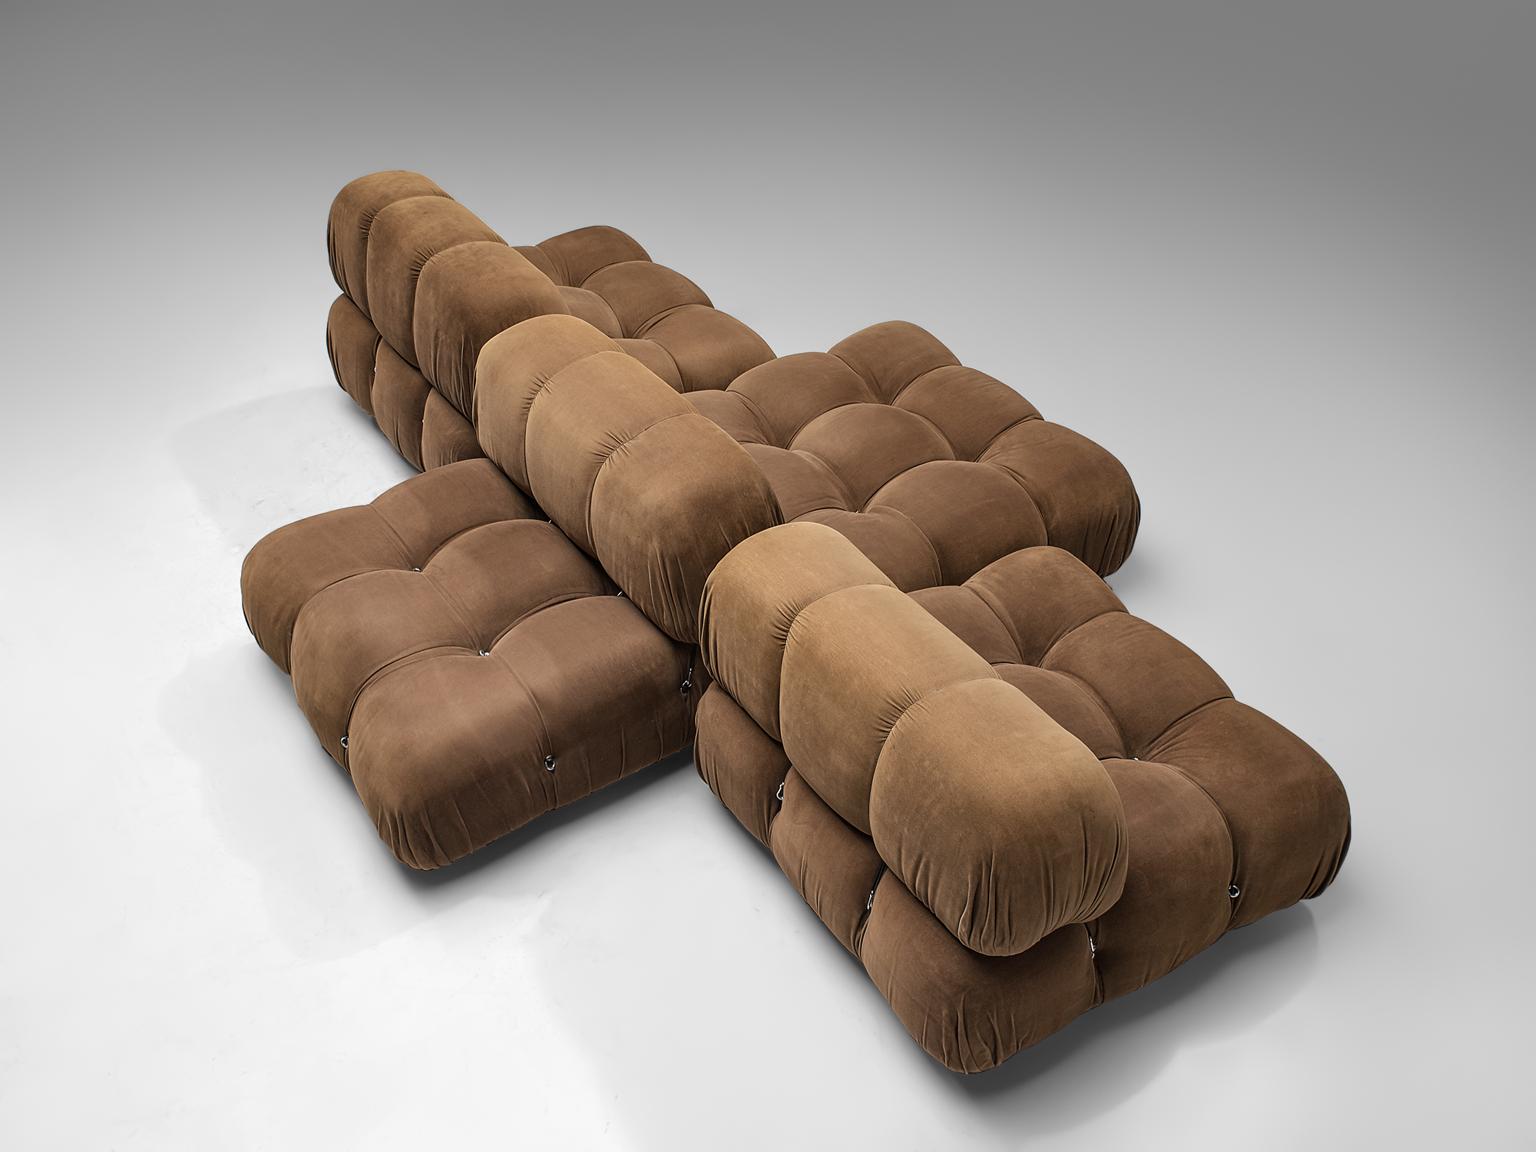 Mario Bellini, 'Camaleonda' sofa, in original brown fabric, Italy, 1972.

This sofa is designed by Mario Bellini for B&B Italia and C&B Italia. It can also be customized on request in our upholstery atelier. The sectional elements this sofa was